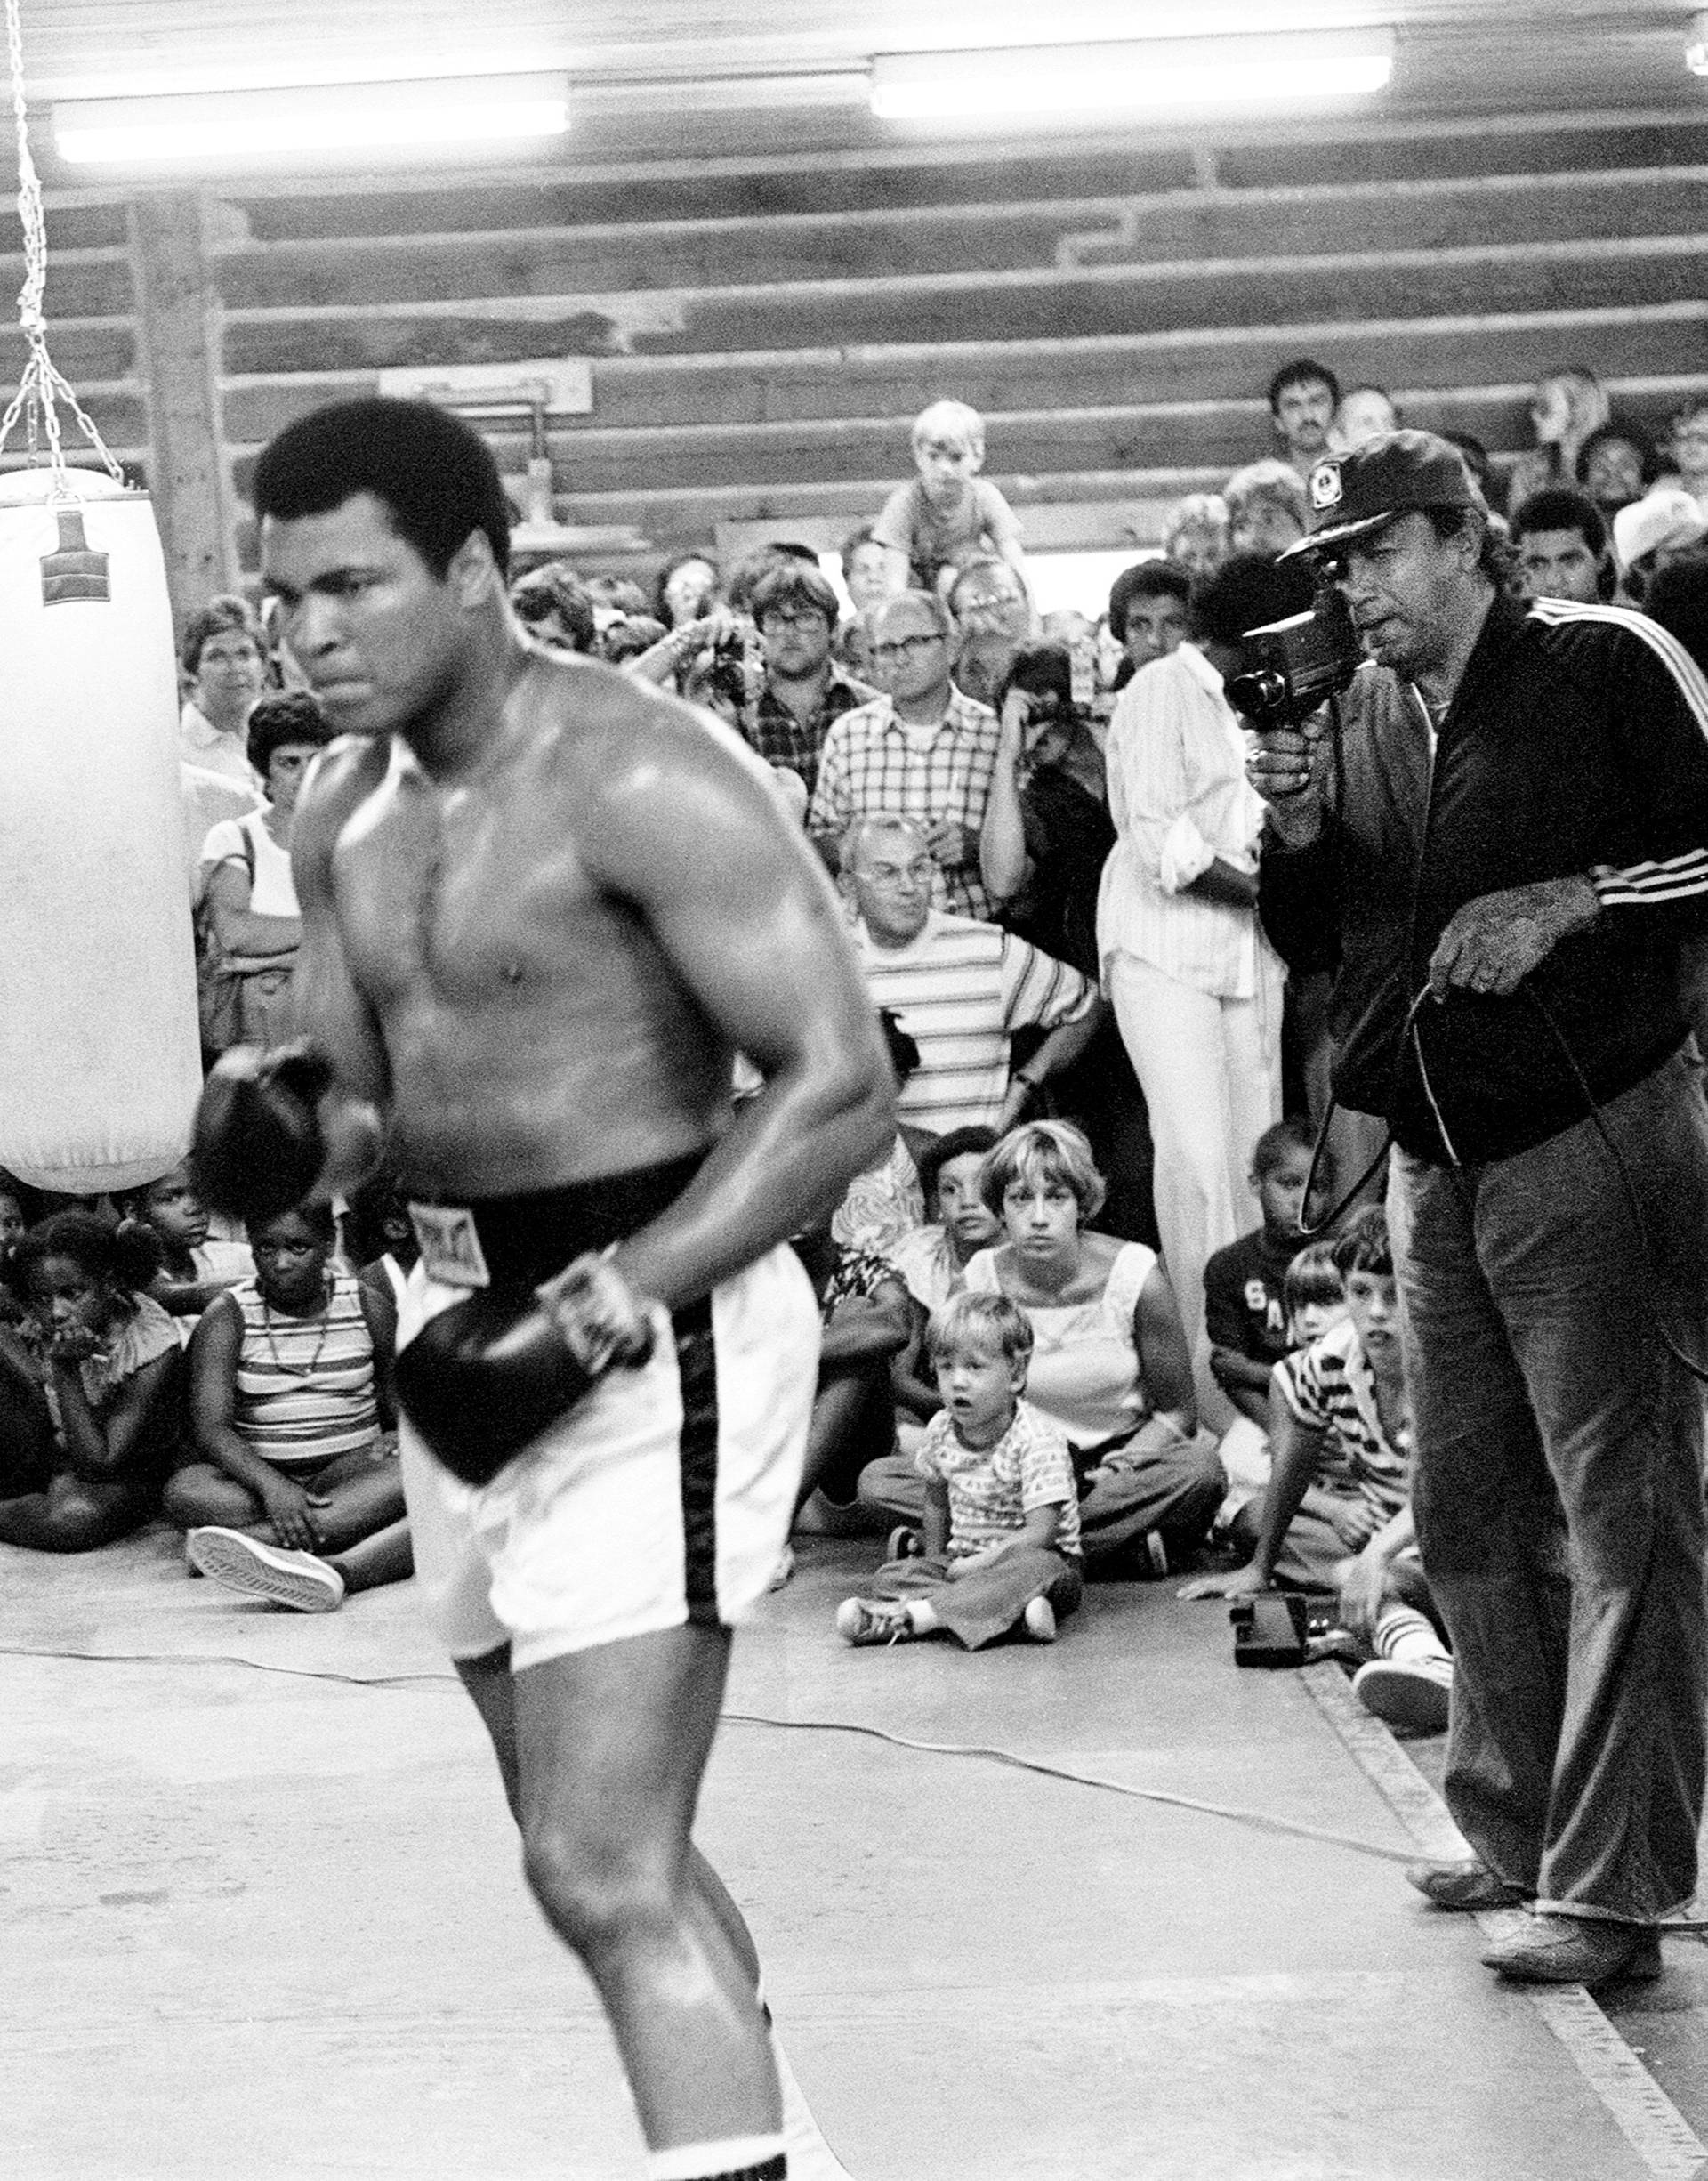 Muhammad Ali trains for his second fight with Leon Spinks in New Orleans